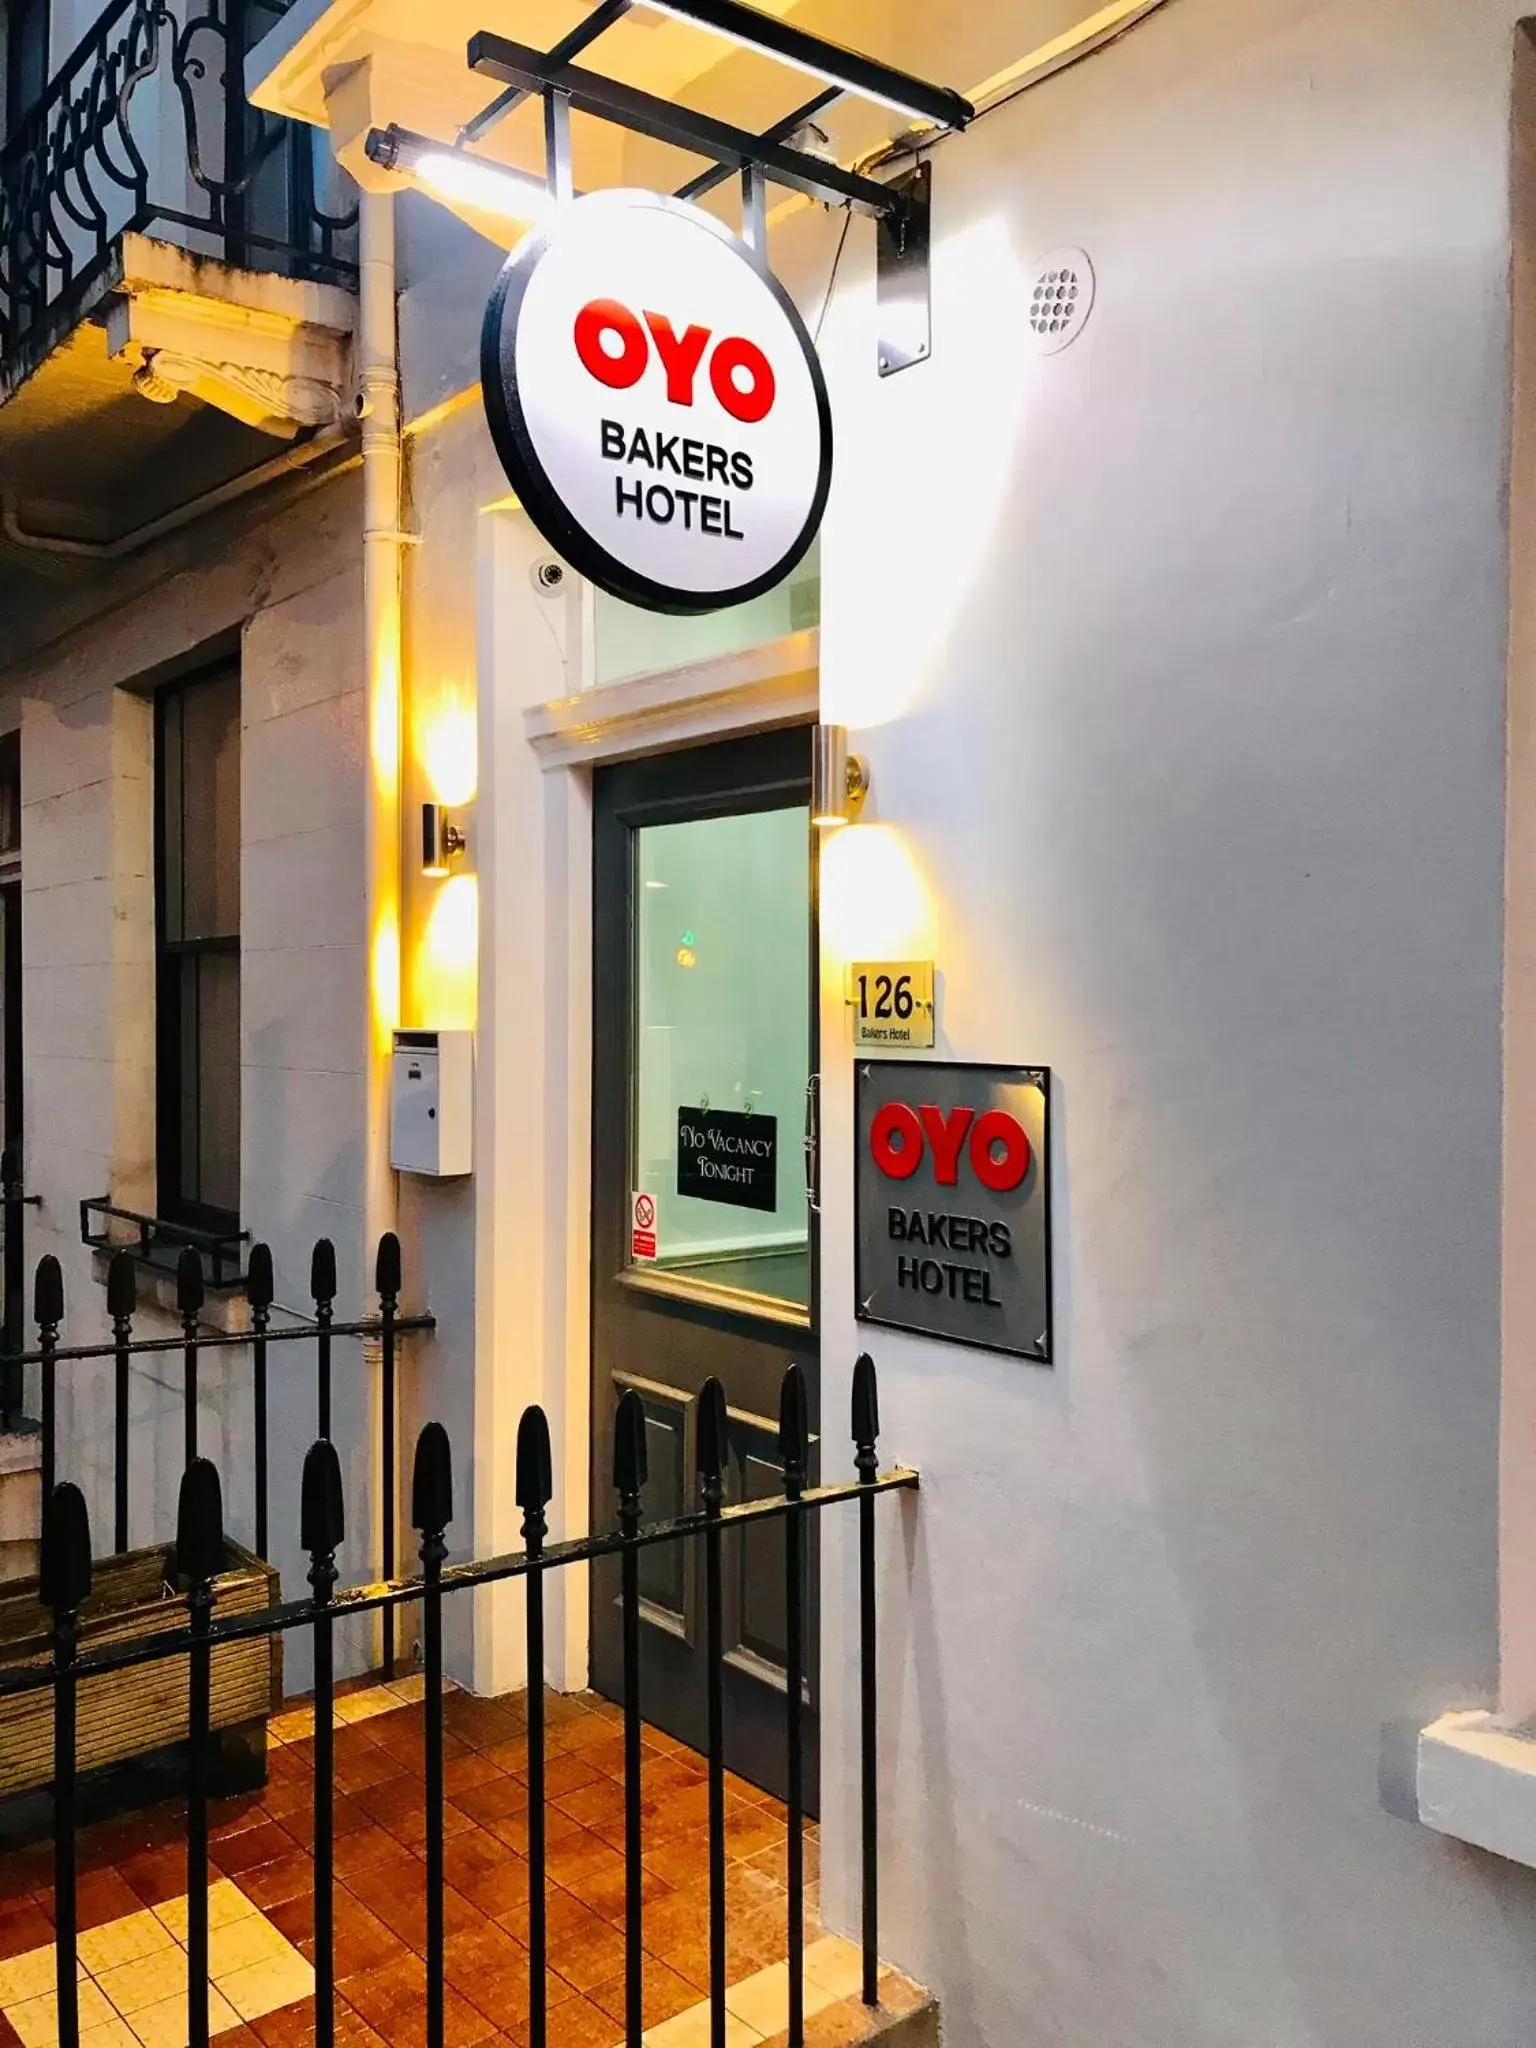 Property building in OYO Bakers Hotel London Victoria